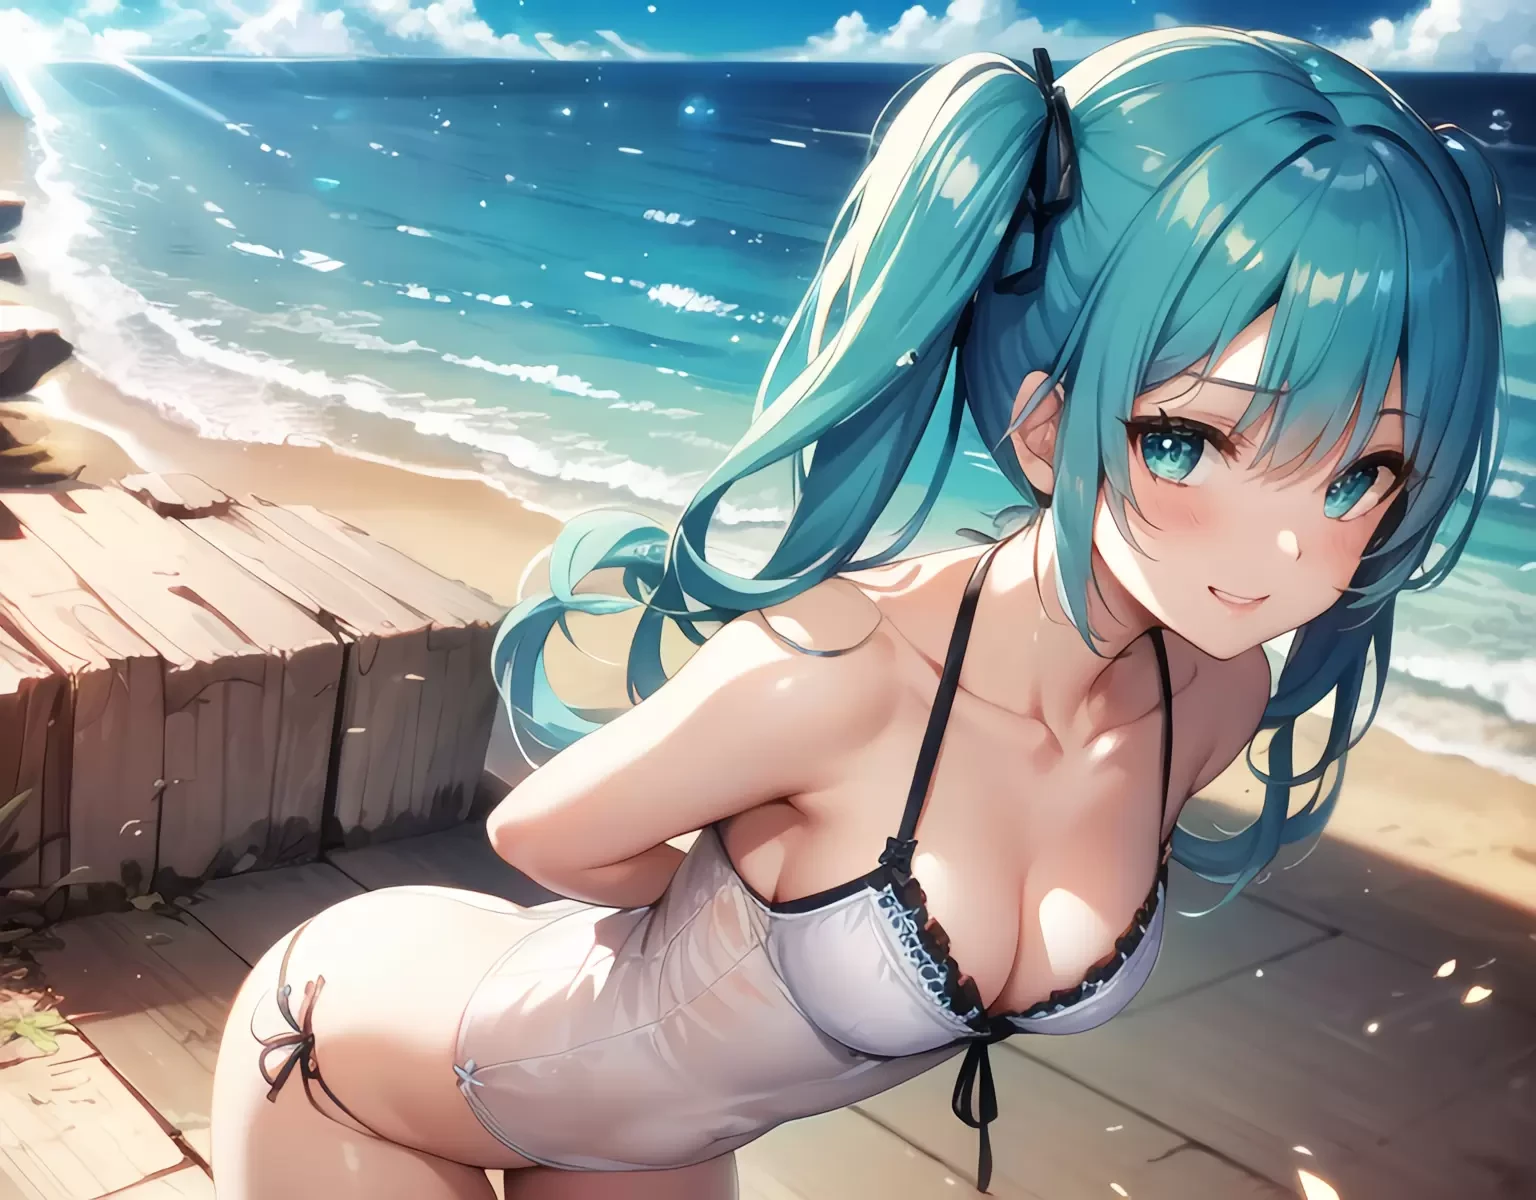 hatsune-miku-anime-style-all-ages-6